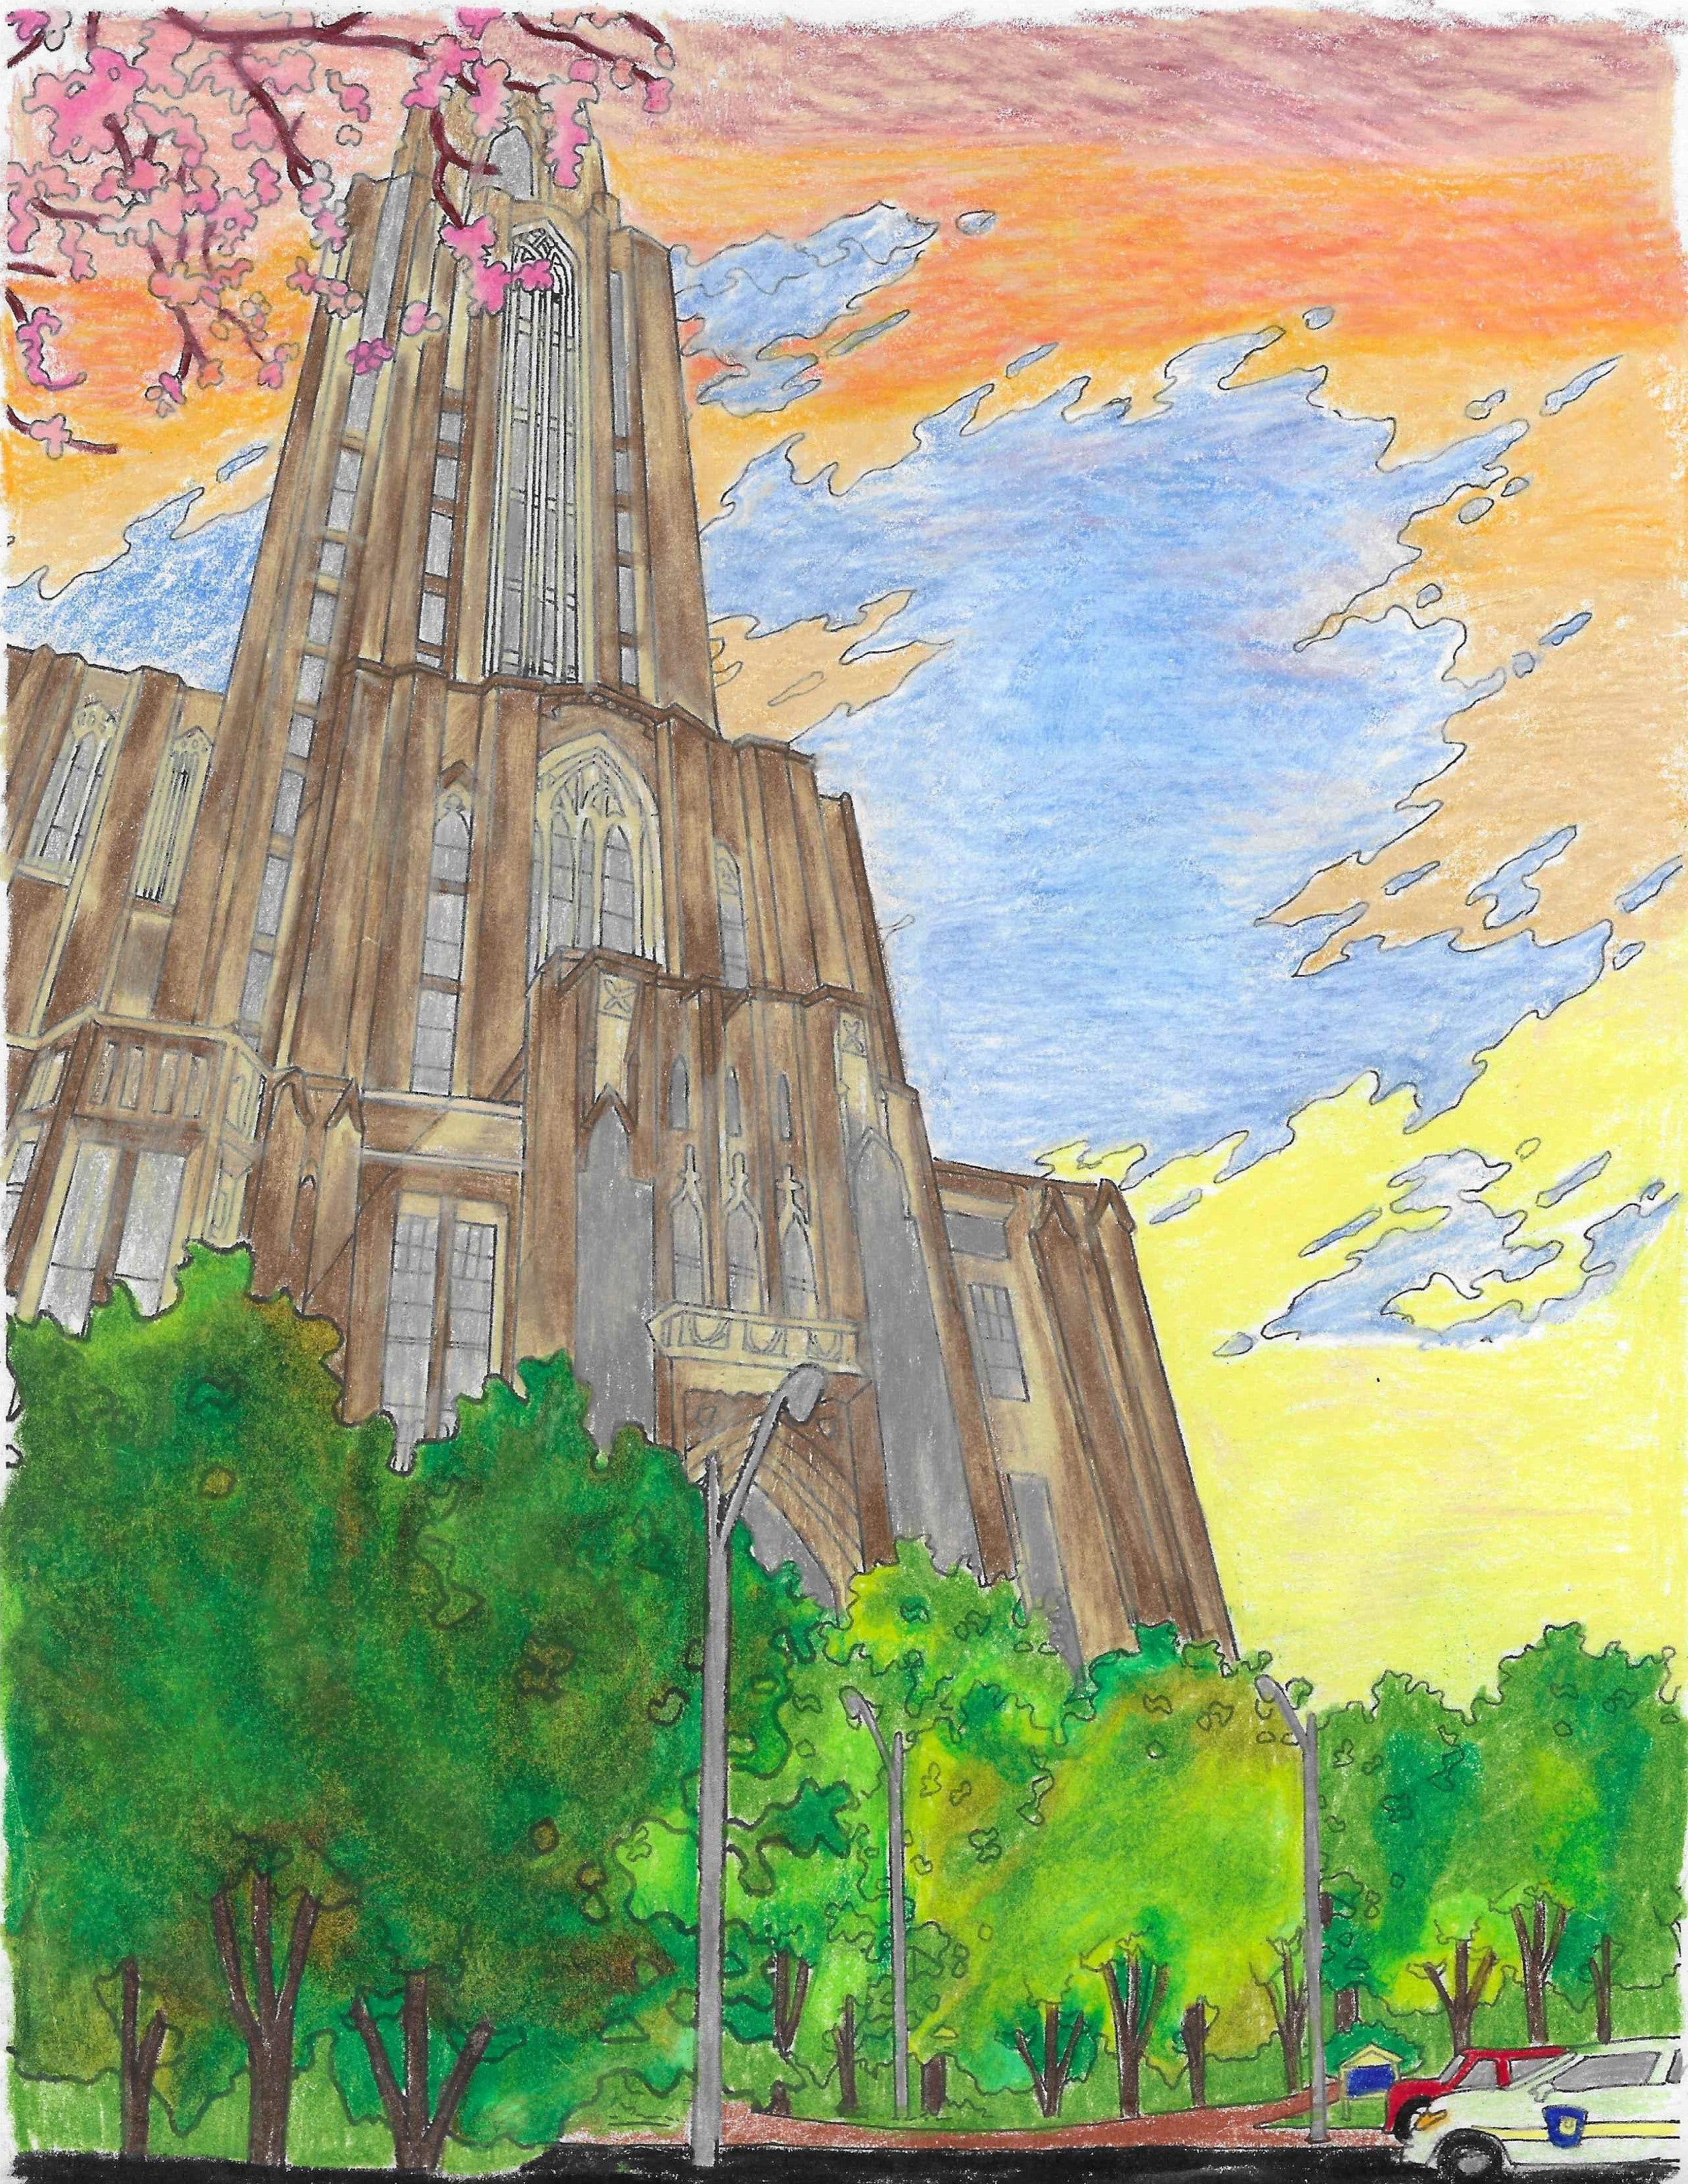 Cathedral of Learning at dawn or dusk, drawn with colored pencils